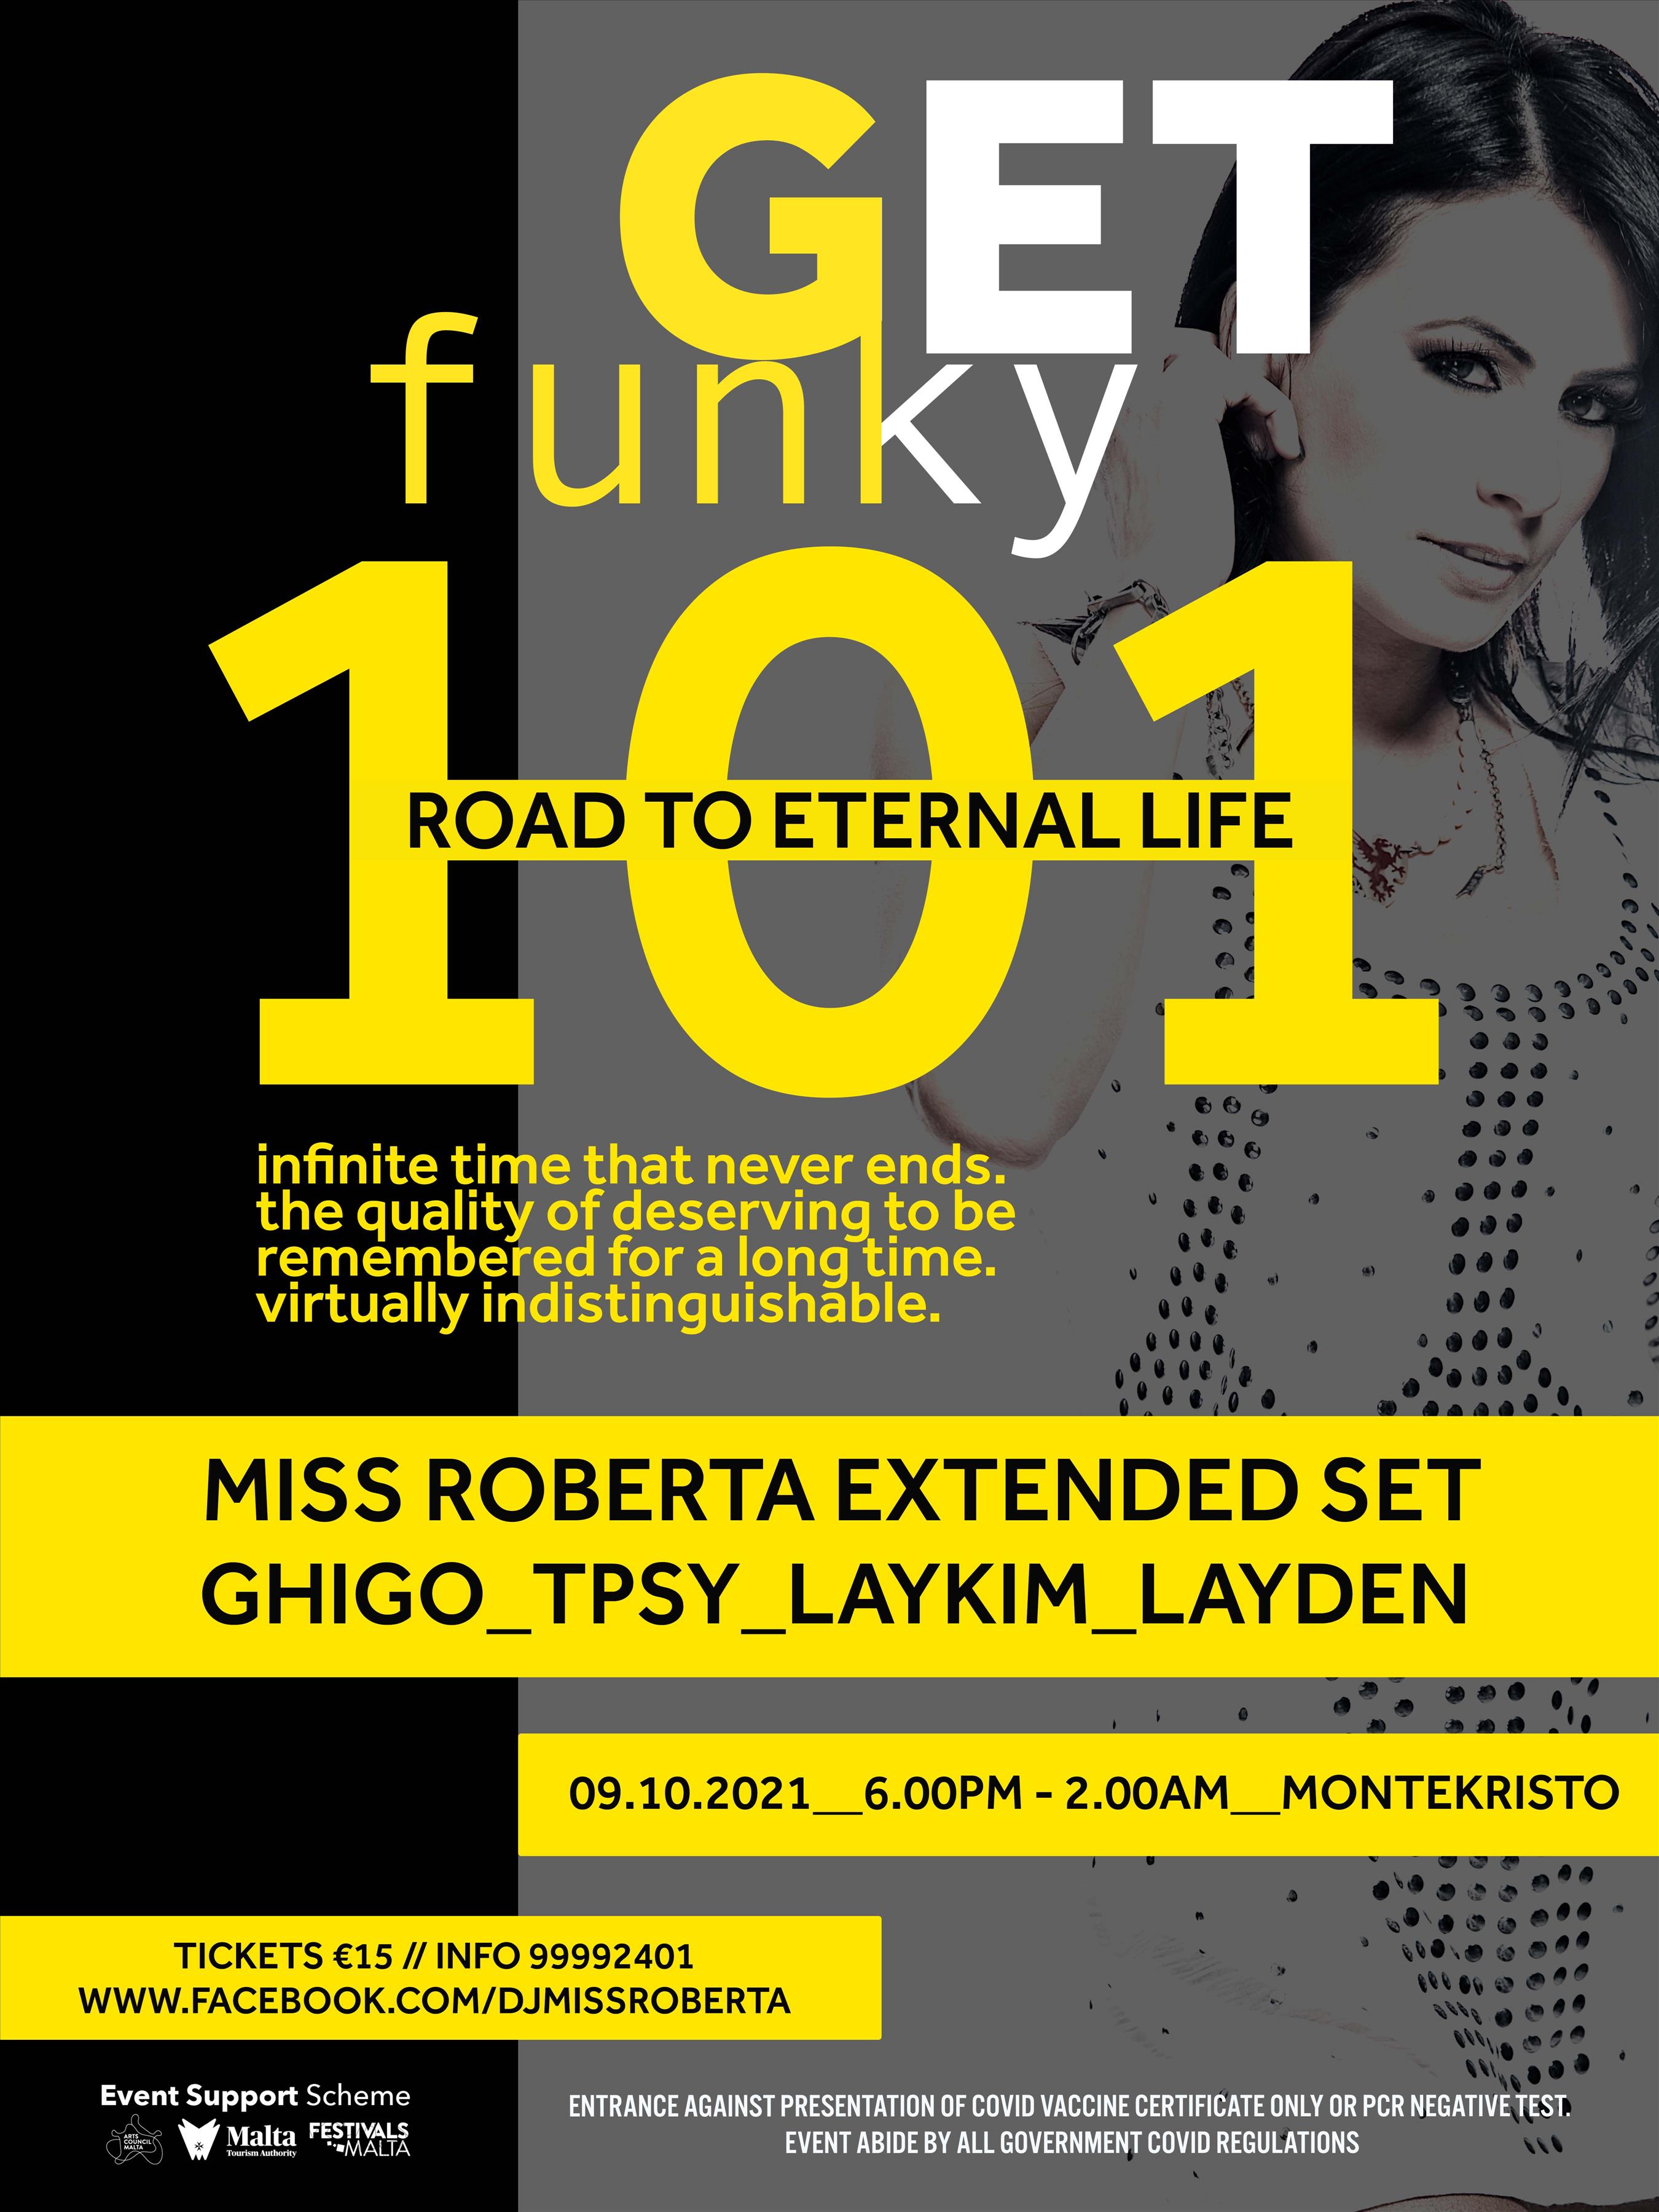 GET FUNKY 101 - ROAD TO ETERNAL LIFE poster